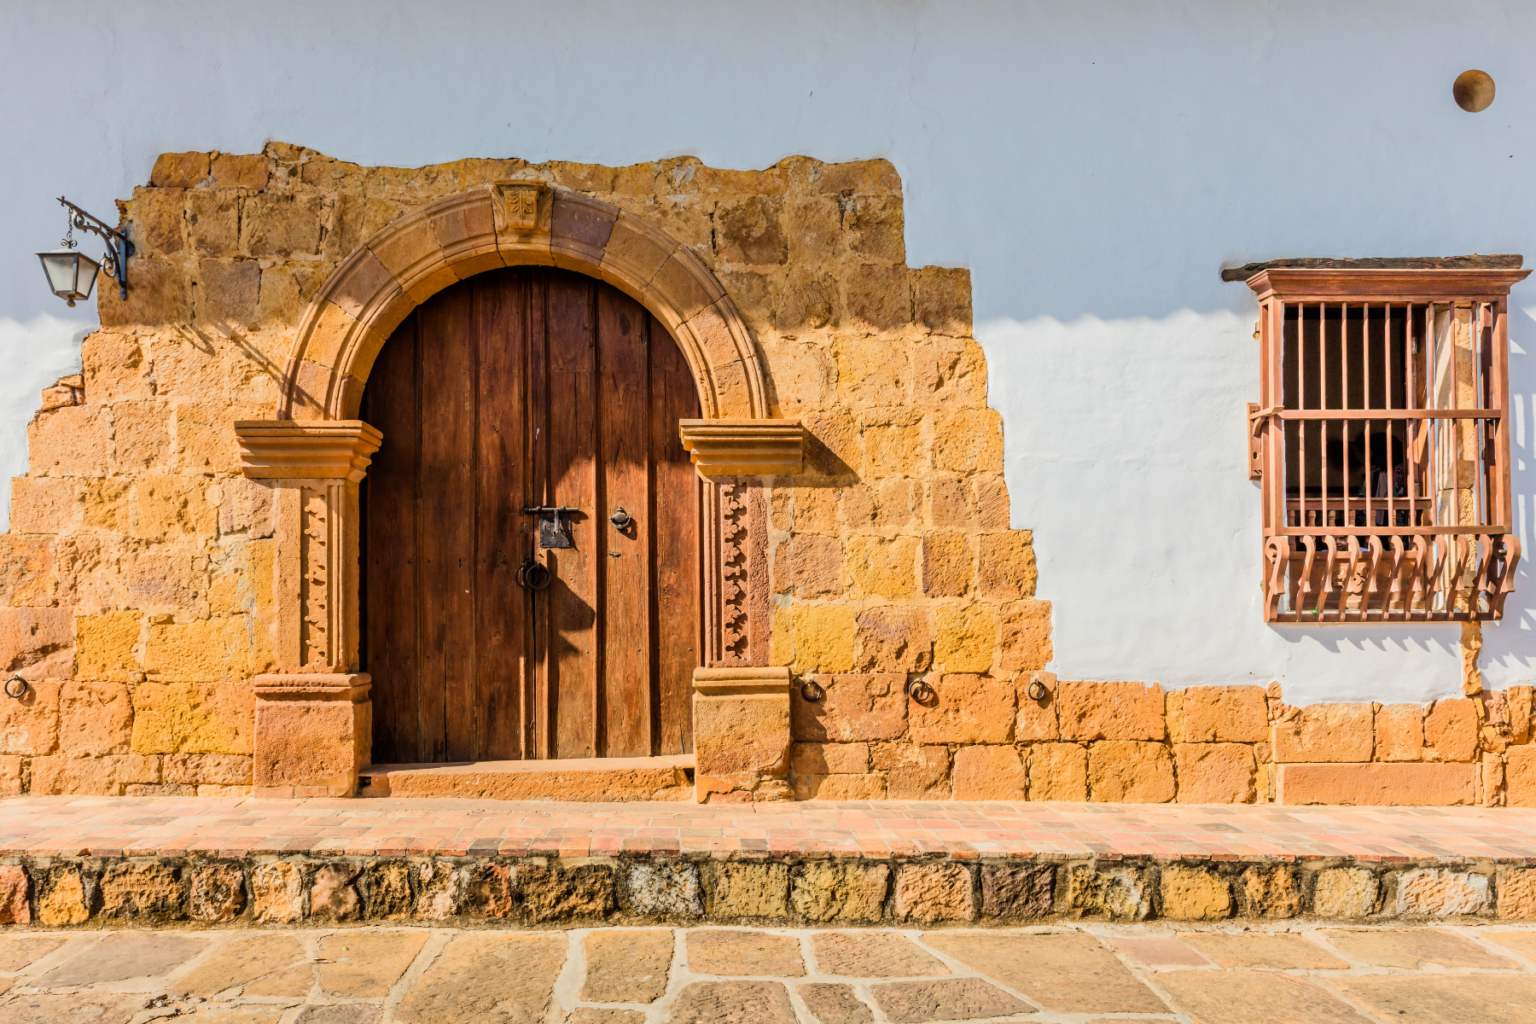 Arched wooden door on adobe house